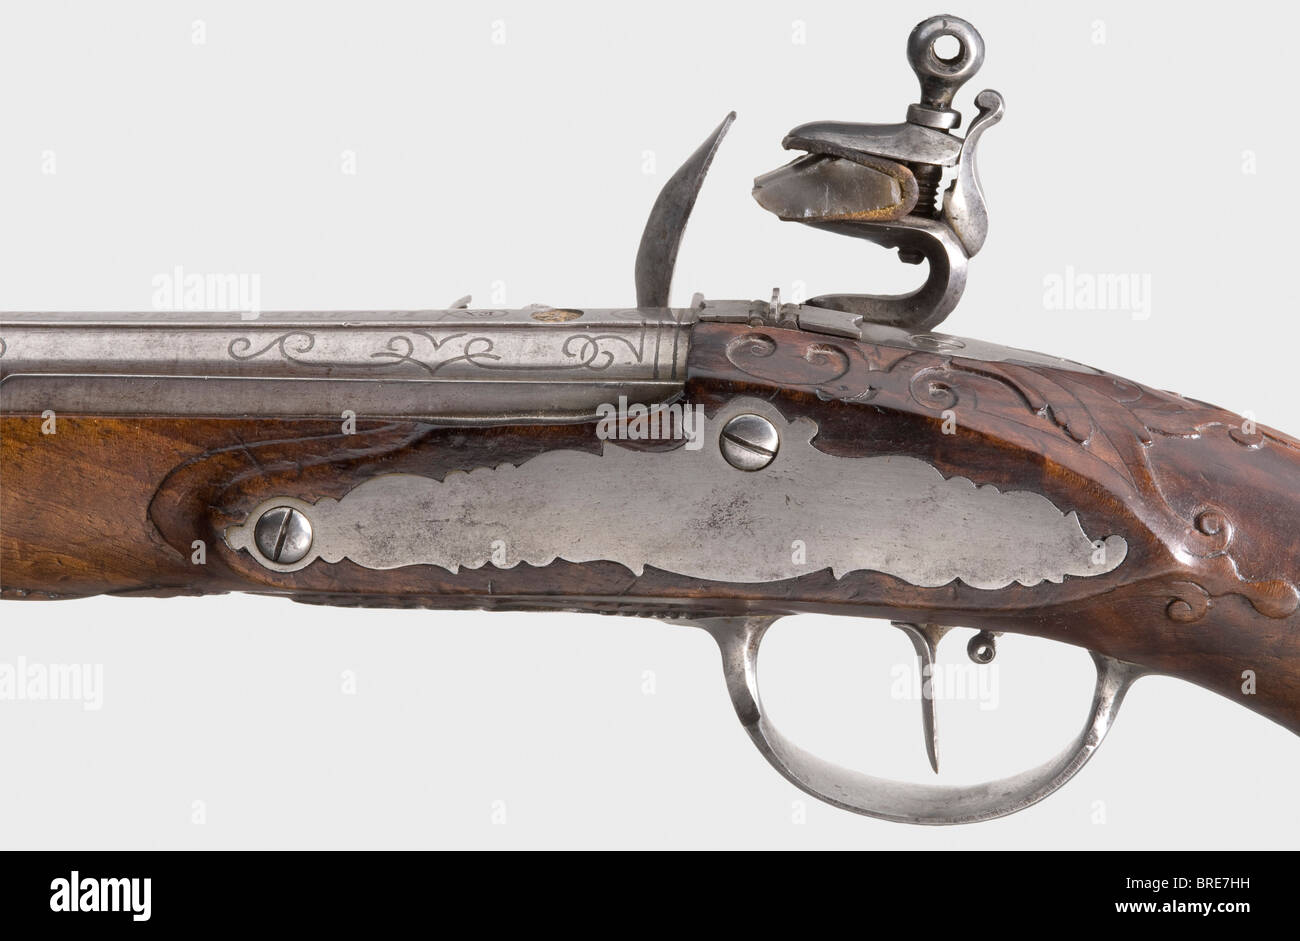 A flintlock pistol, Johann Andreas Kuchenreuter, Steinweg near Regensburg, circa 1800. Round Damascus barrel with microgroove rifling in 12 mm calibre. Silver front sight and folding two-piece iron rear sight. The top of the barrel bears rich silver-inlaid scroll decoration and the signature, 'I. ANDREAS KUCHENREUTER.' The number '2' is inscribed over the breech, which also has a gold-filled rider mark. Iron flintlock with another signature on the lockplate. Roller-mounted frizzen. Single set trigger. Carved walnut stock with a horn nose cap and iron furniture., Stock Photo